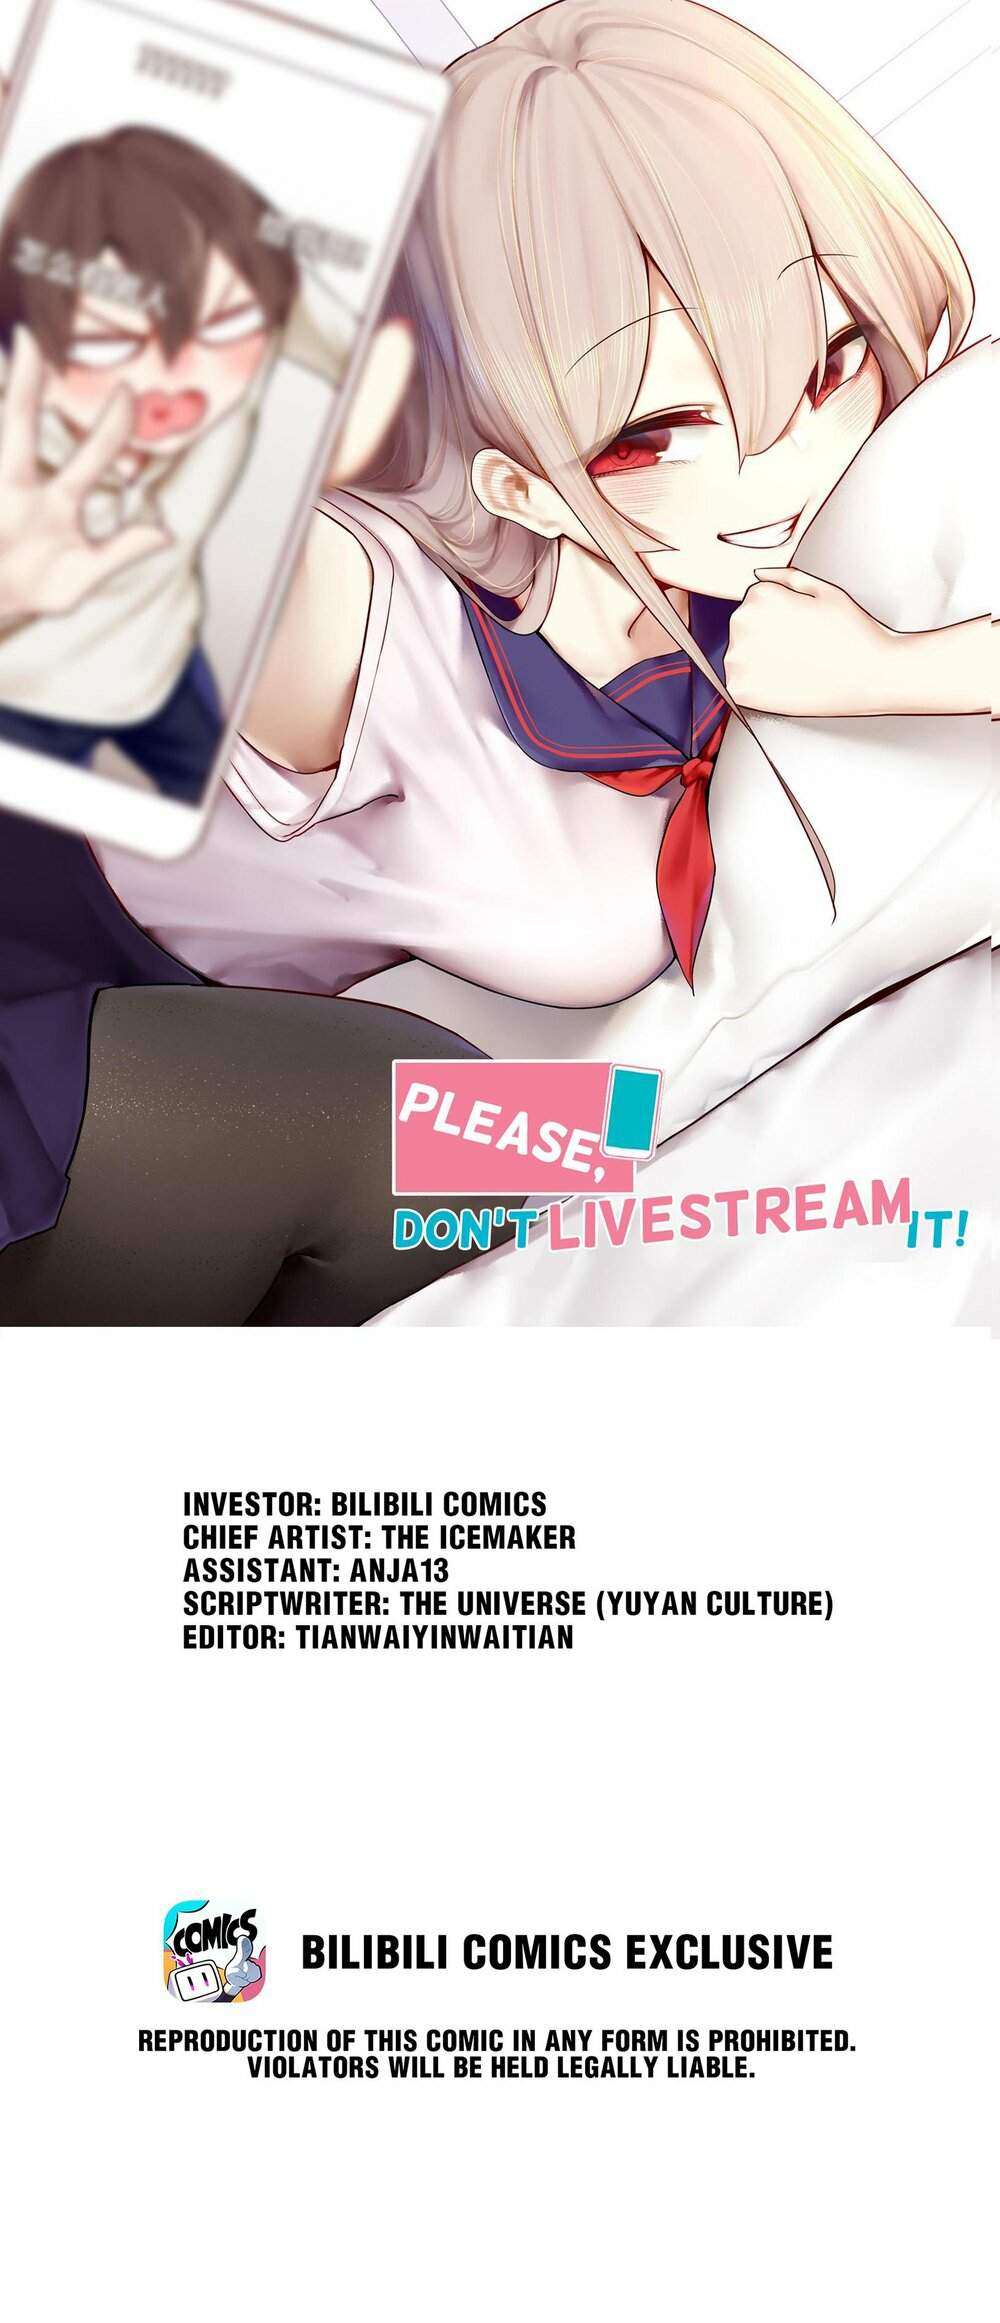 Miss, don’t livestream it! Chapter 26-1